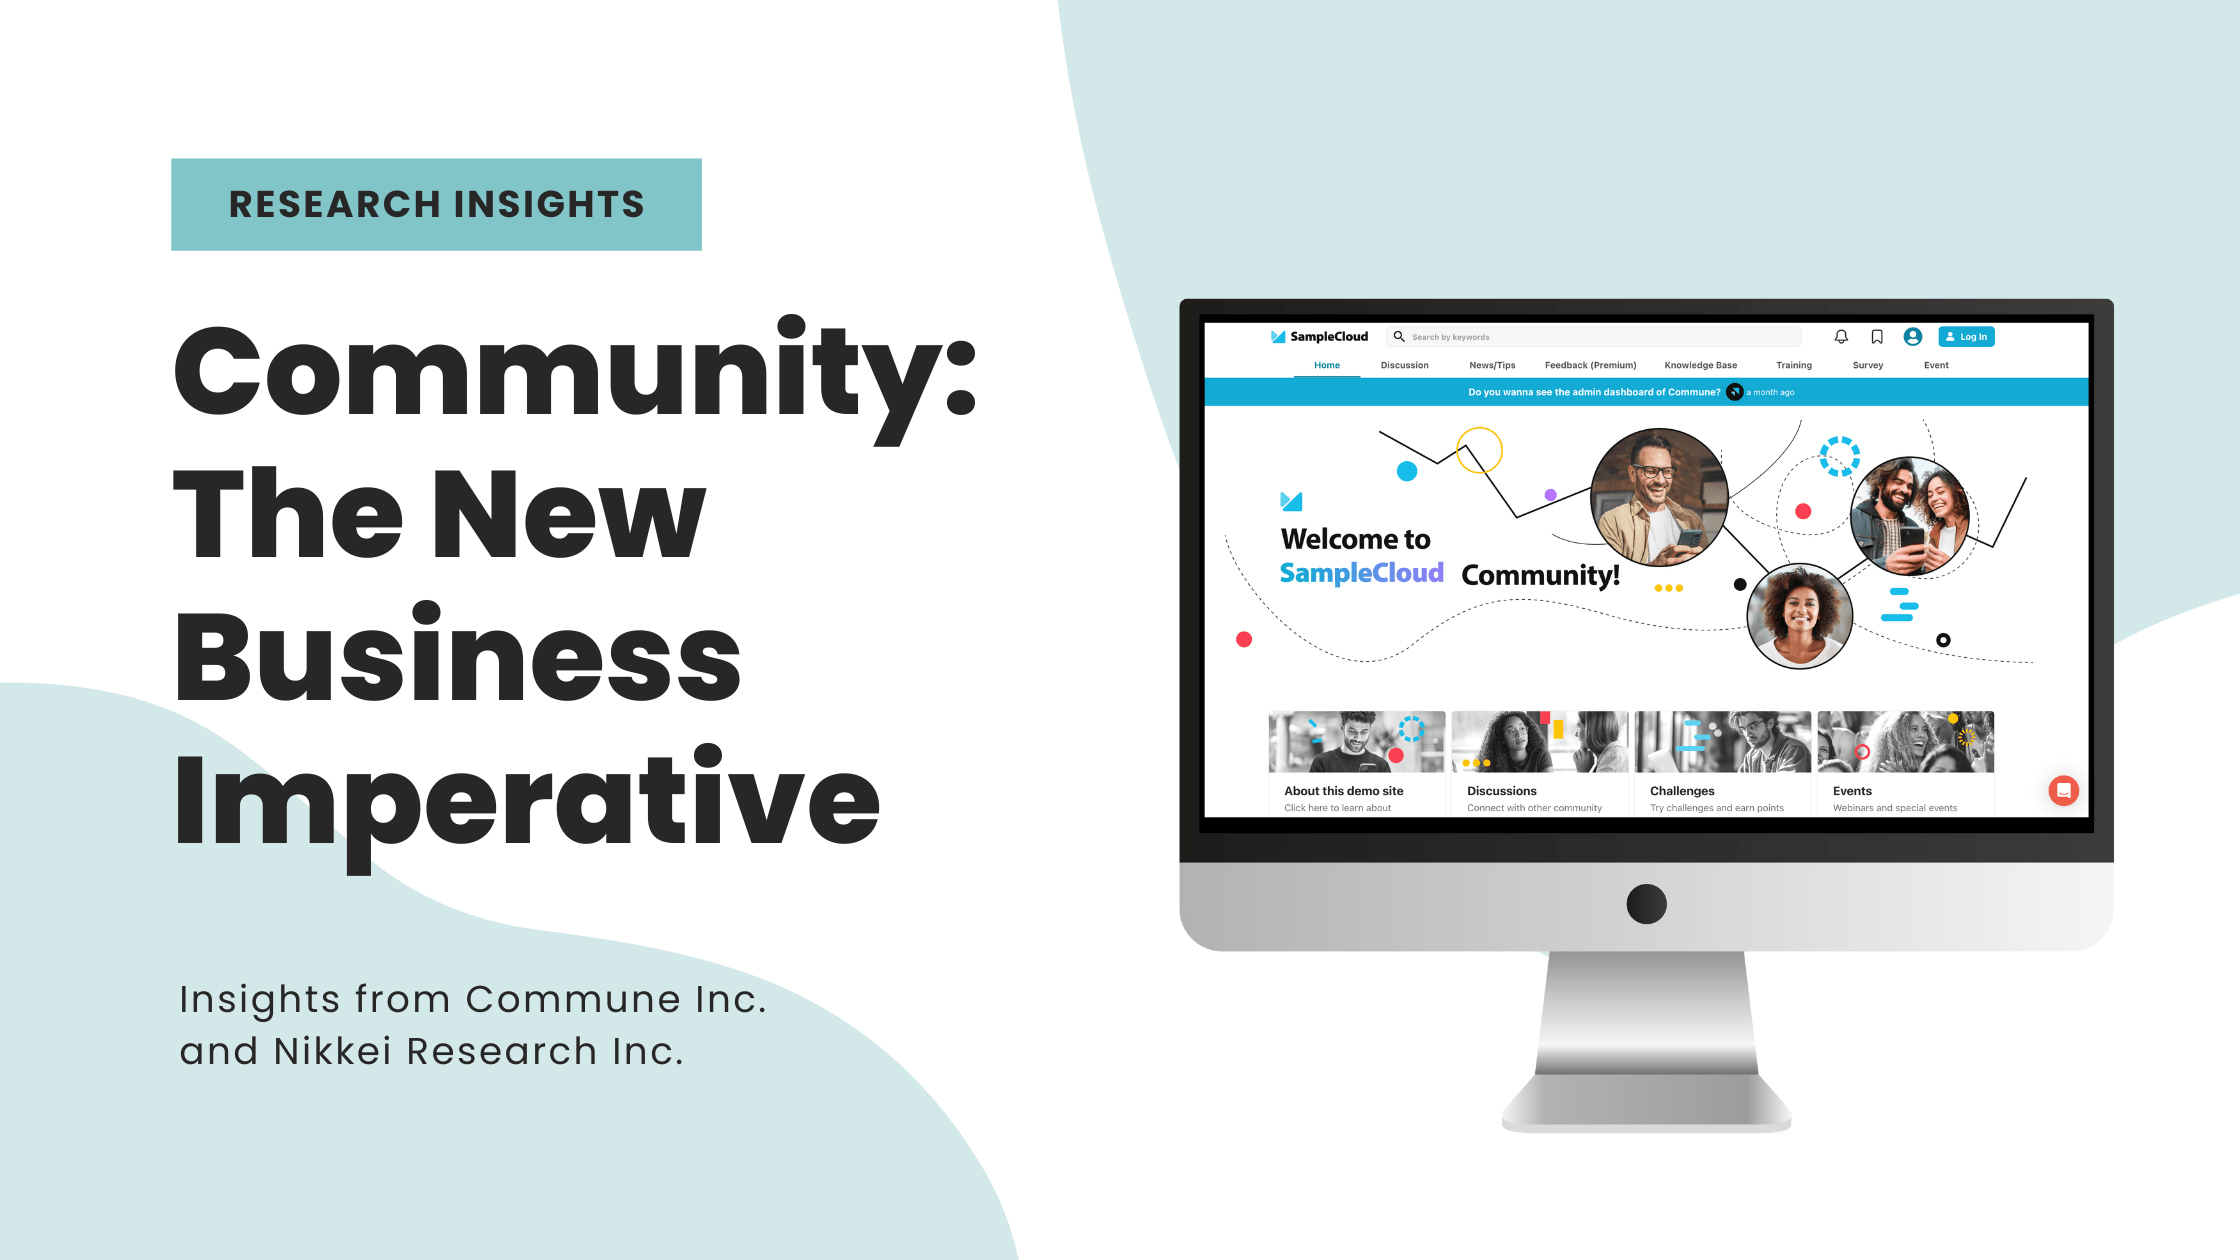 Community: The New Business Imperative – Insights from Commune Inc. and Nikkei Research Inc.